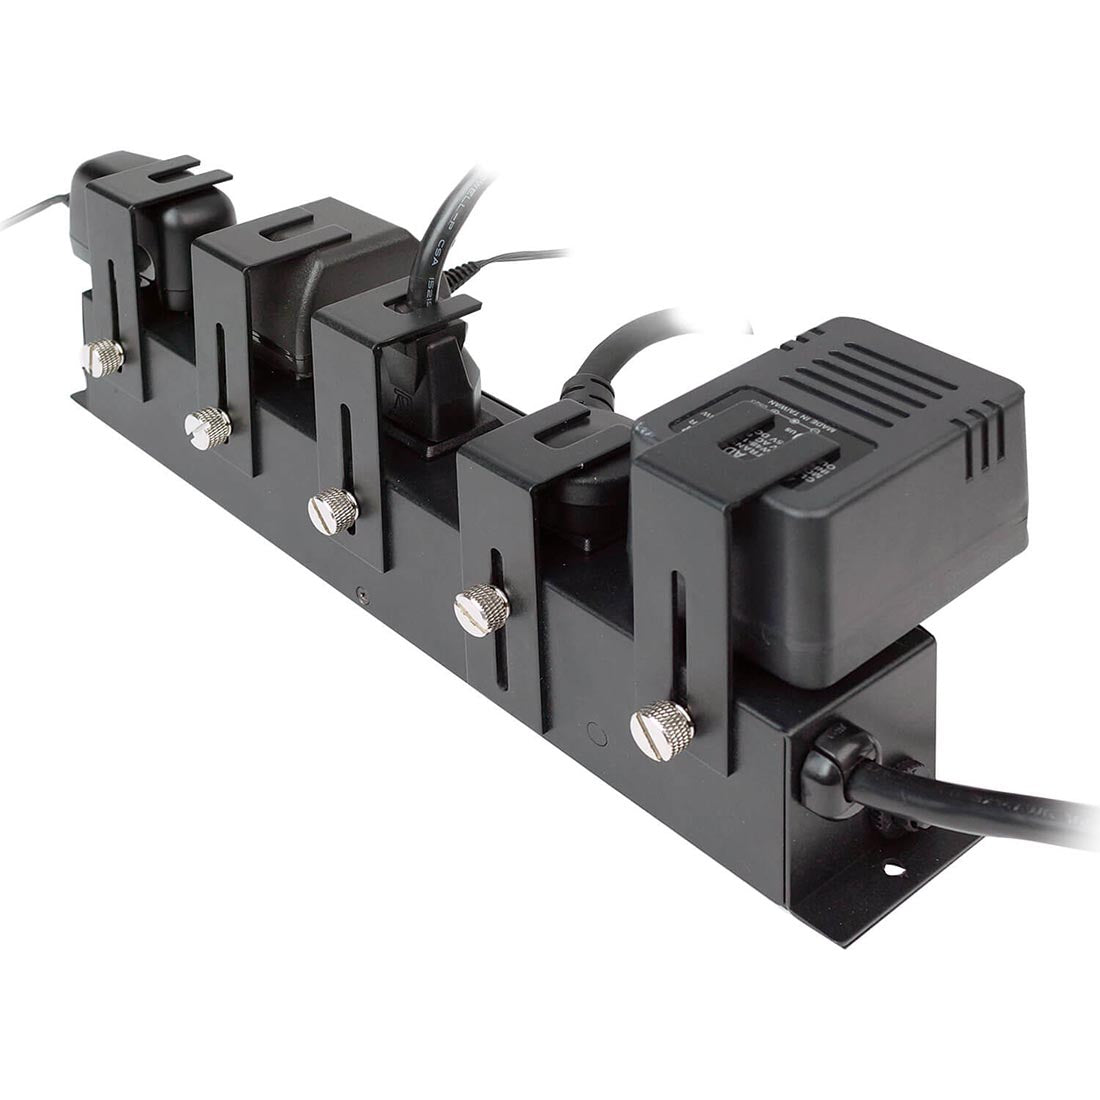 Furman PlugLock power distribution strip with adjustable clamps